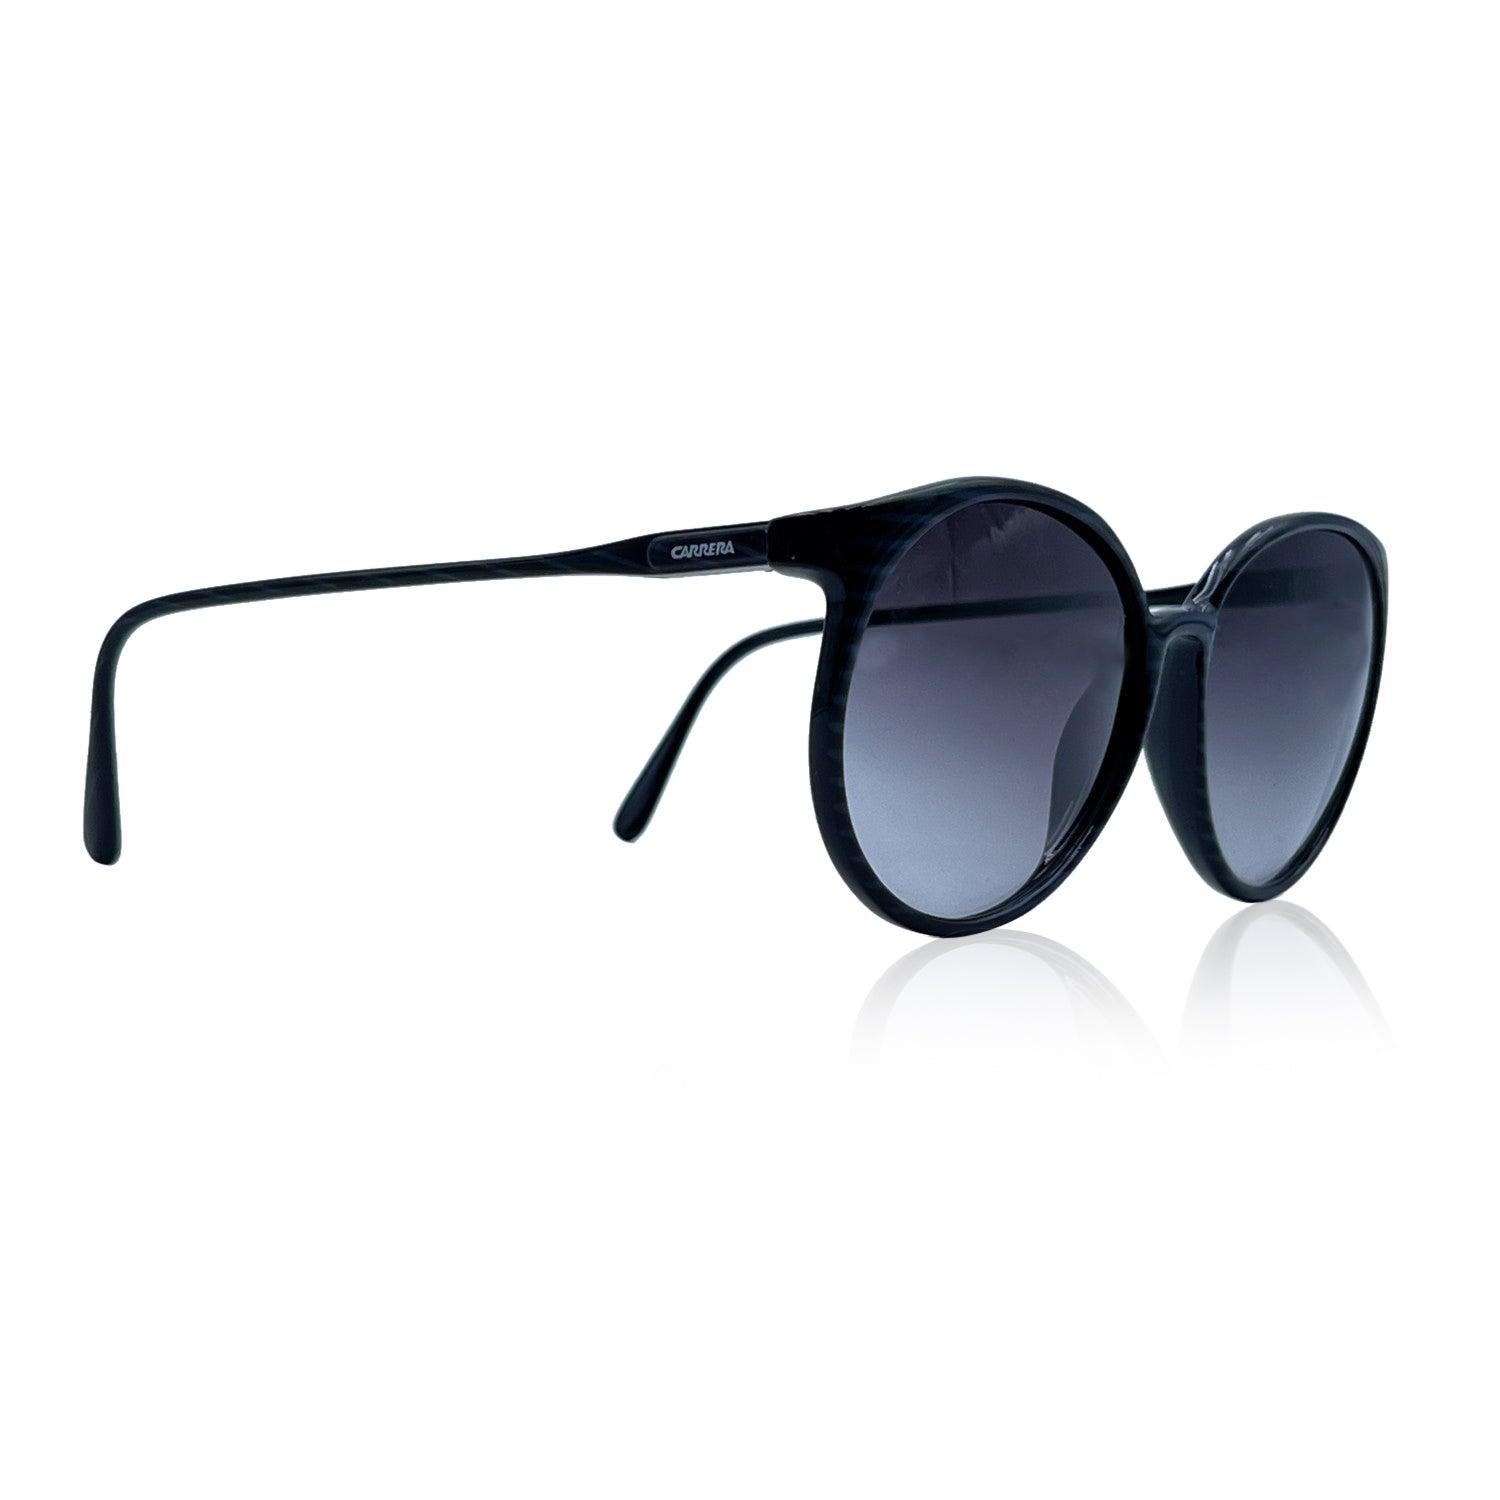 Round, large sunglasses by Carrera. Optyl frame (LCM), in black color, with gray horizontal stripes pattern. Frame made in Austria. Model refs: 5354 - 50 - 58/16 . Gradient grey lens Details MATERIAL: Acetate COLOR: Black MODEL: 5354 GENDER: Women